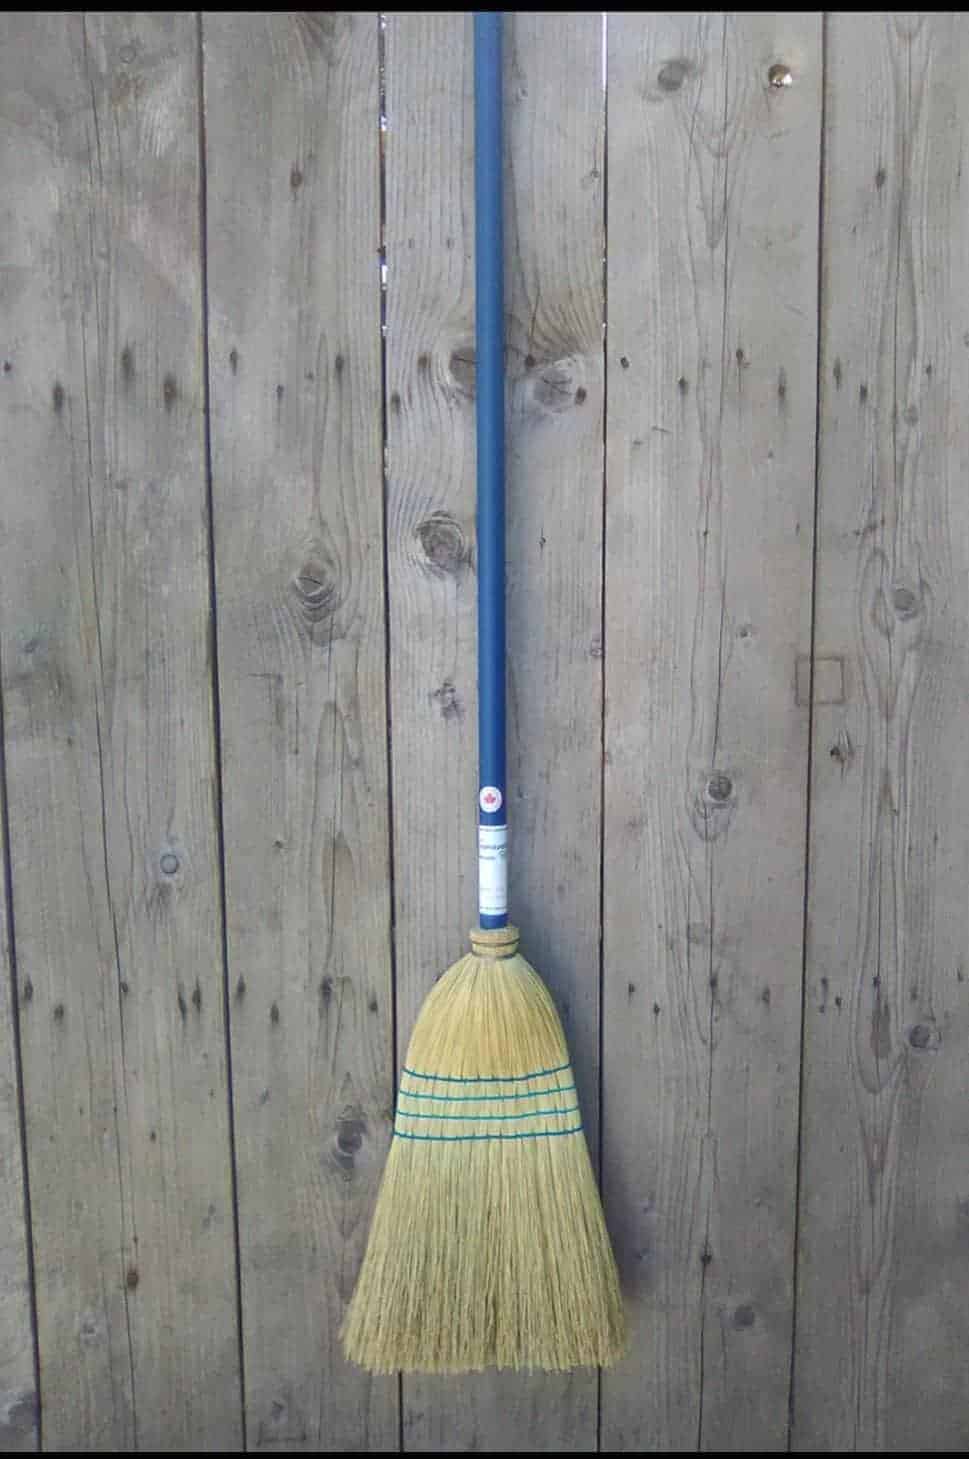 The great canadian outdoor broom - plain